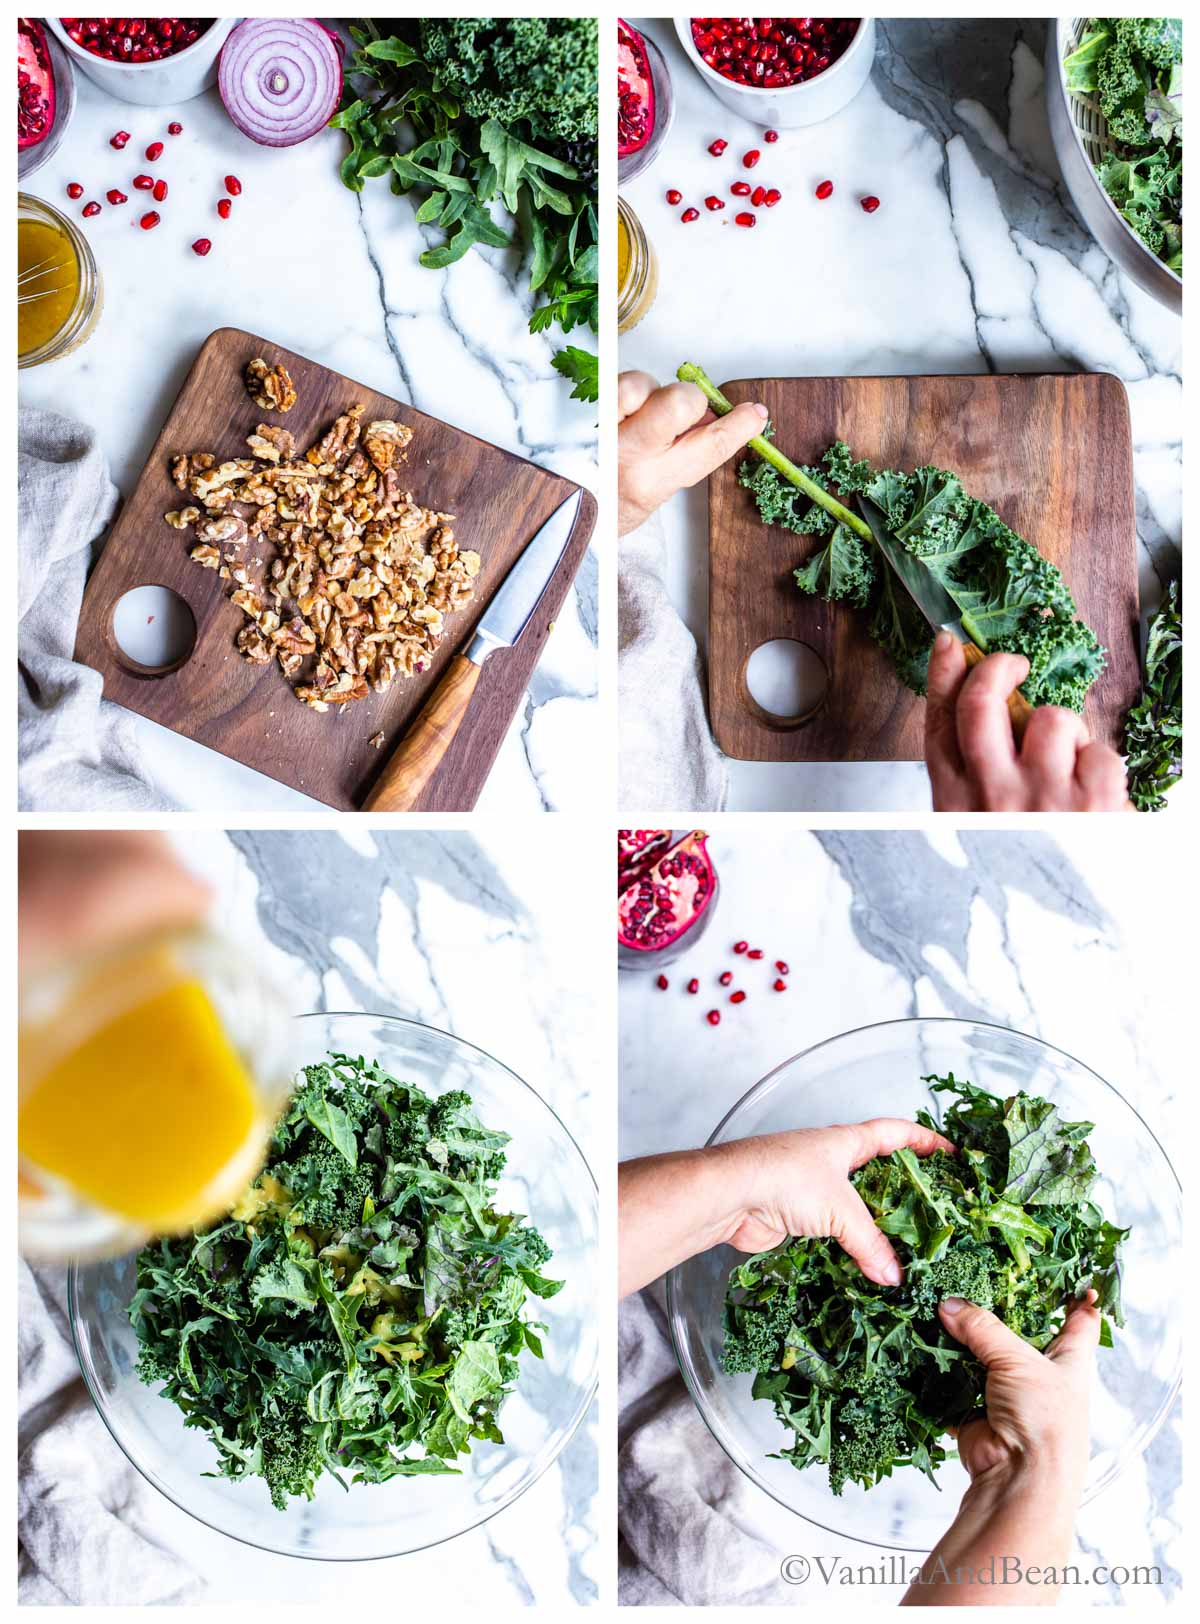 1. Chopped walnuts on a cutting board. 2. Stem being removed from kale on a cutting board. 3. Pouring dressing over kale in a bowl. 4. Massing kale in a bowl.